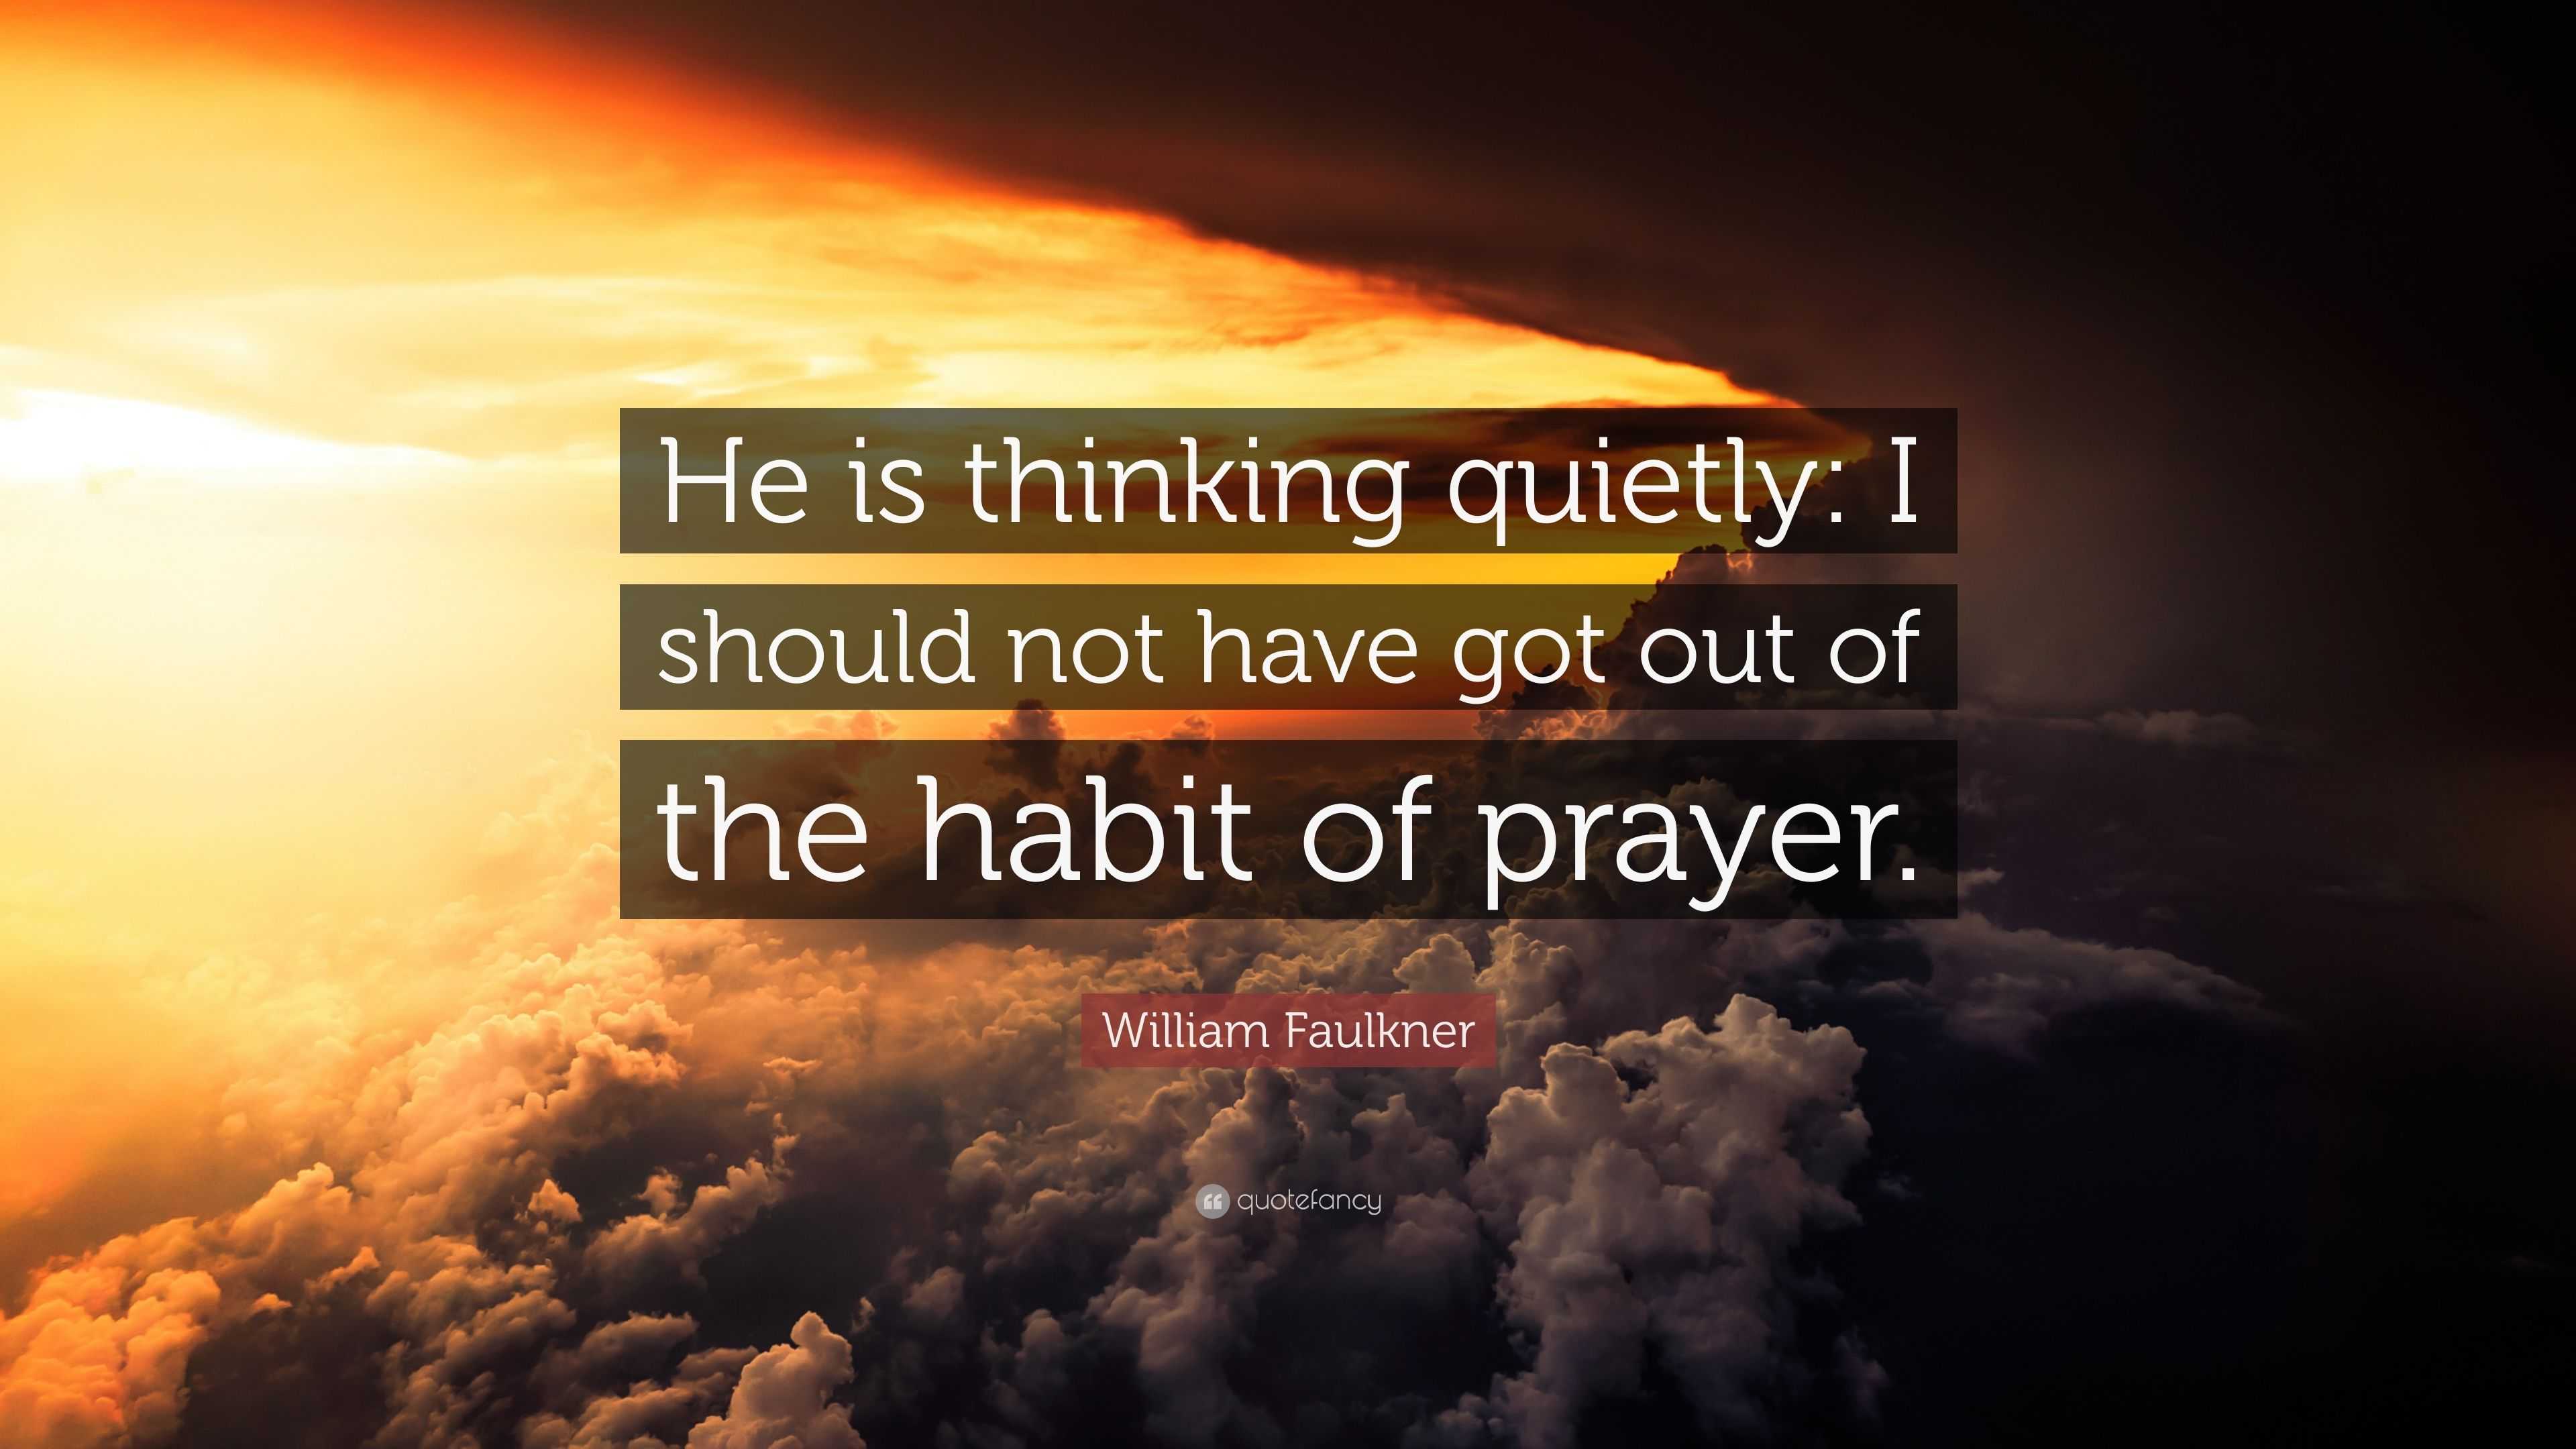 William Faulkner Quote: “He is thinking quietly: I should not have got ...